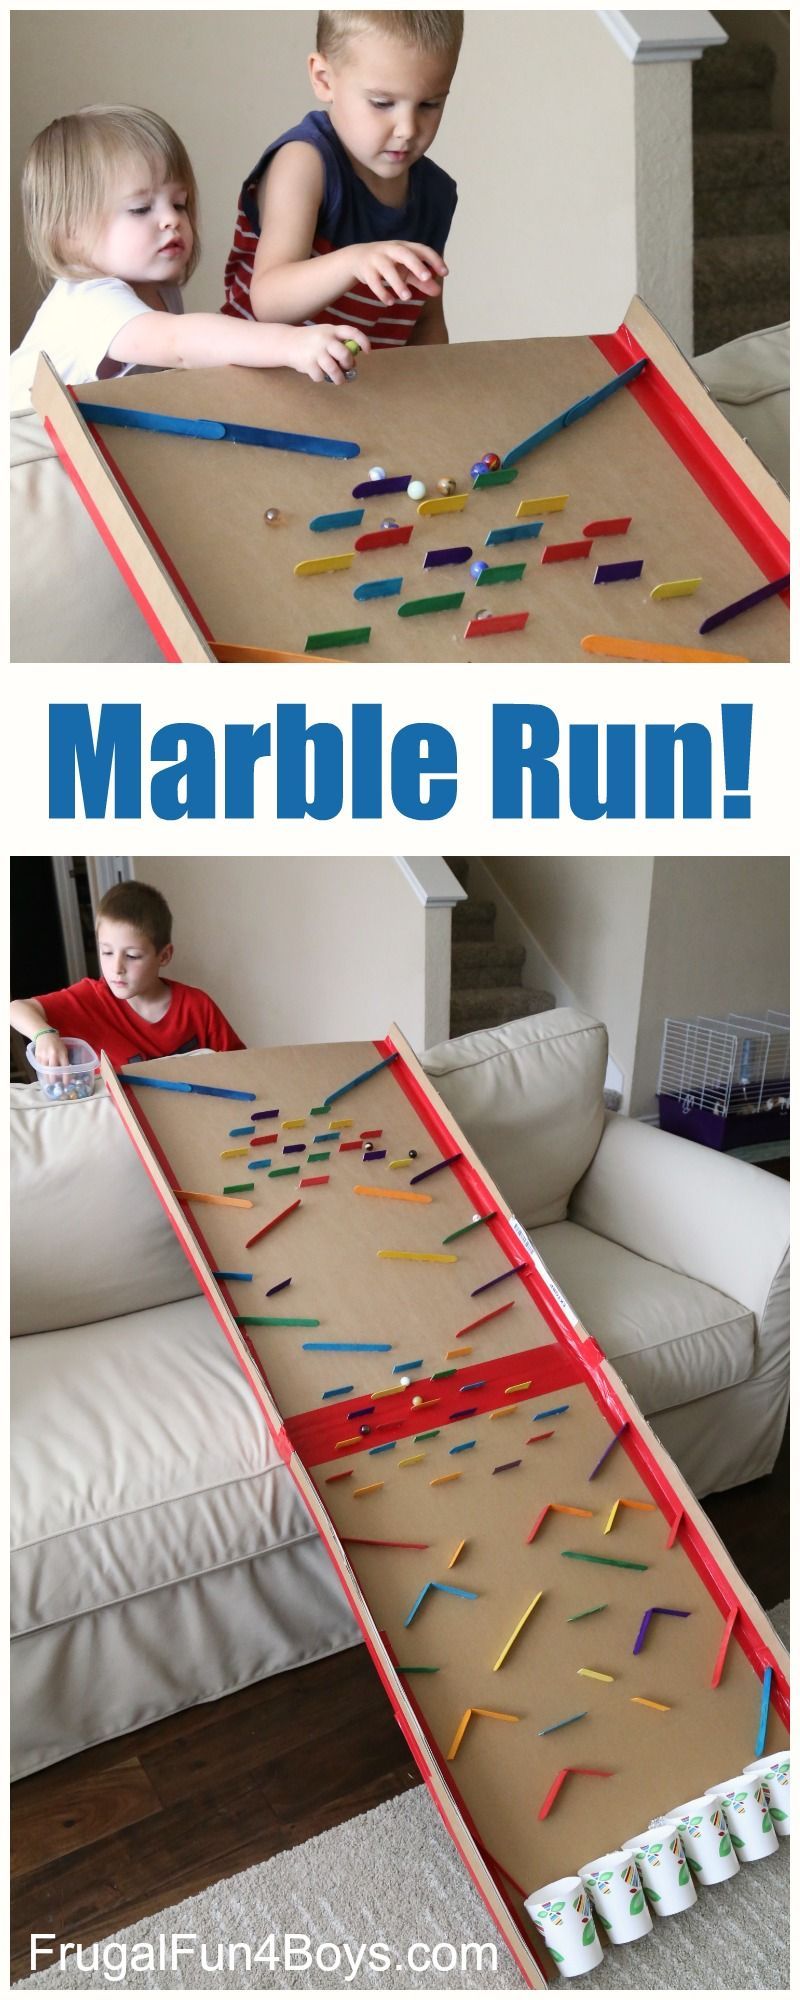 Turn a Cardboard Box into an Epic Marble Run – Great engineering challenge for kids.  Fun group activity to see what each group